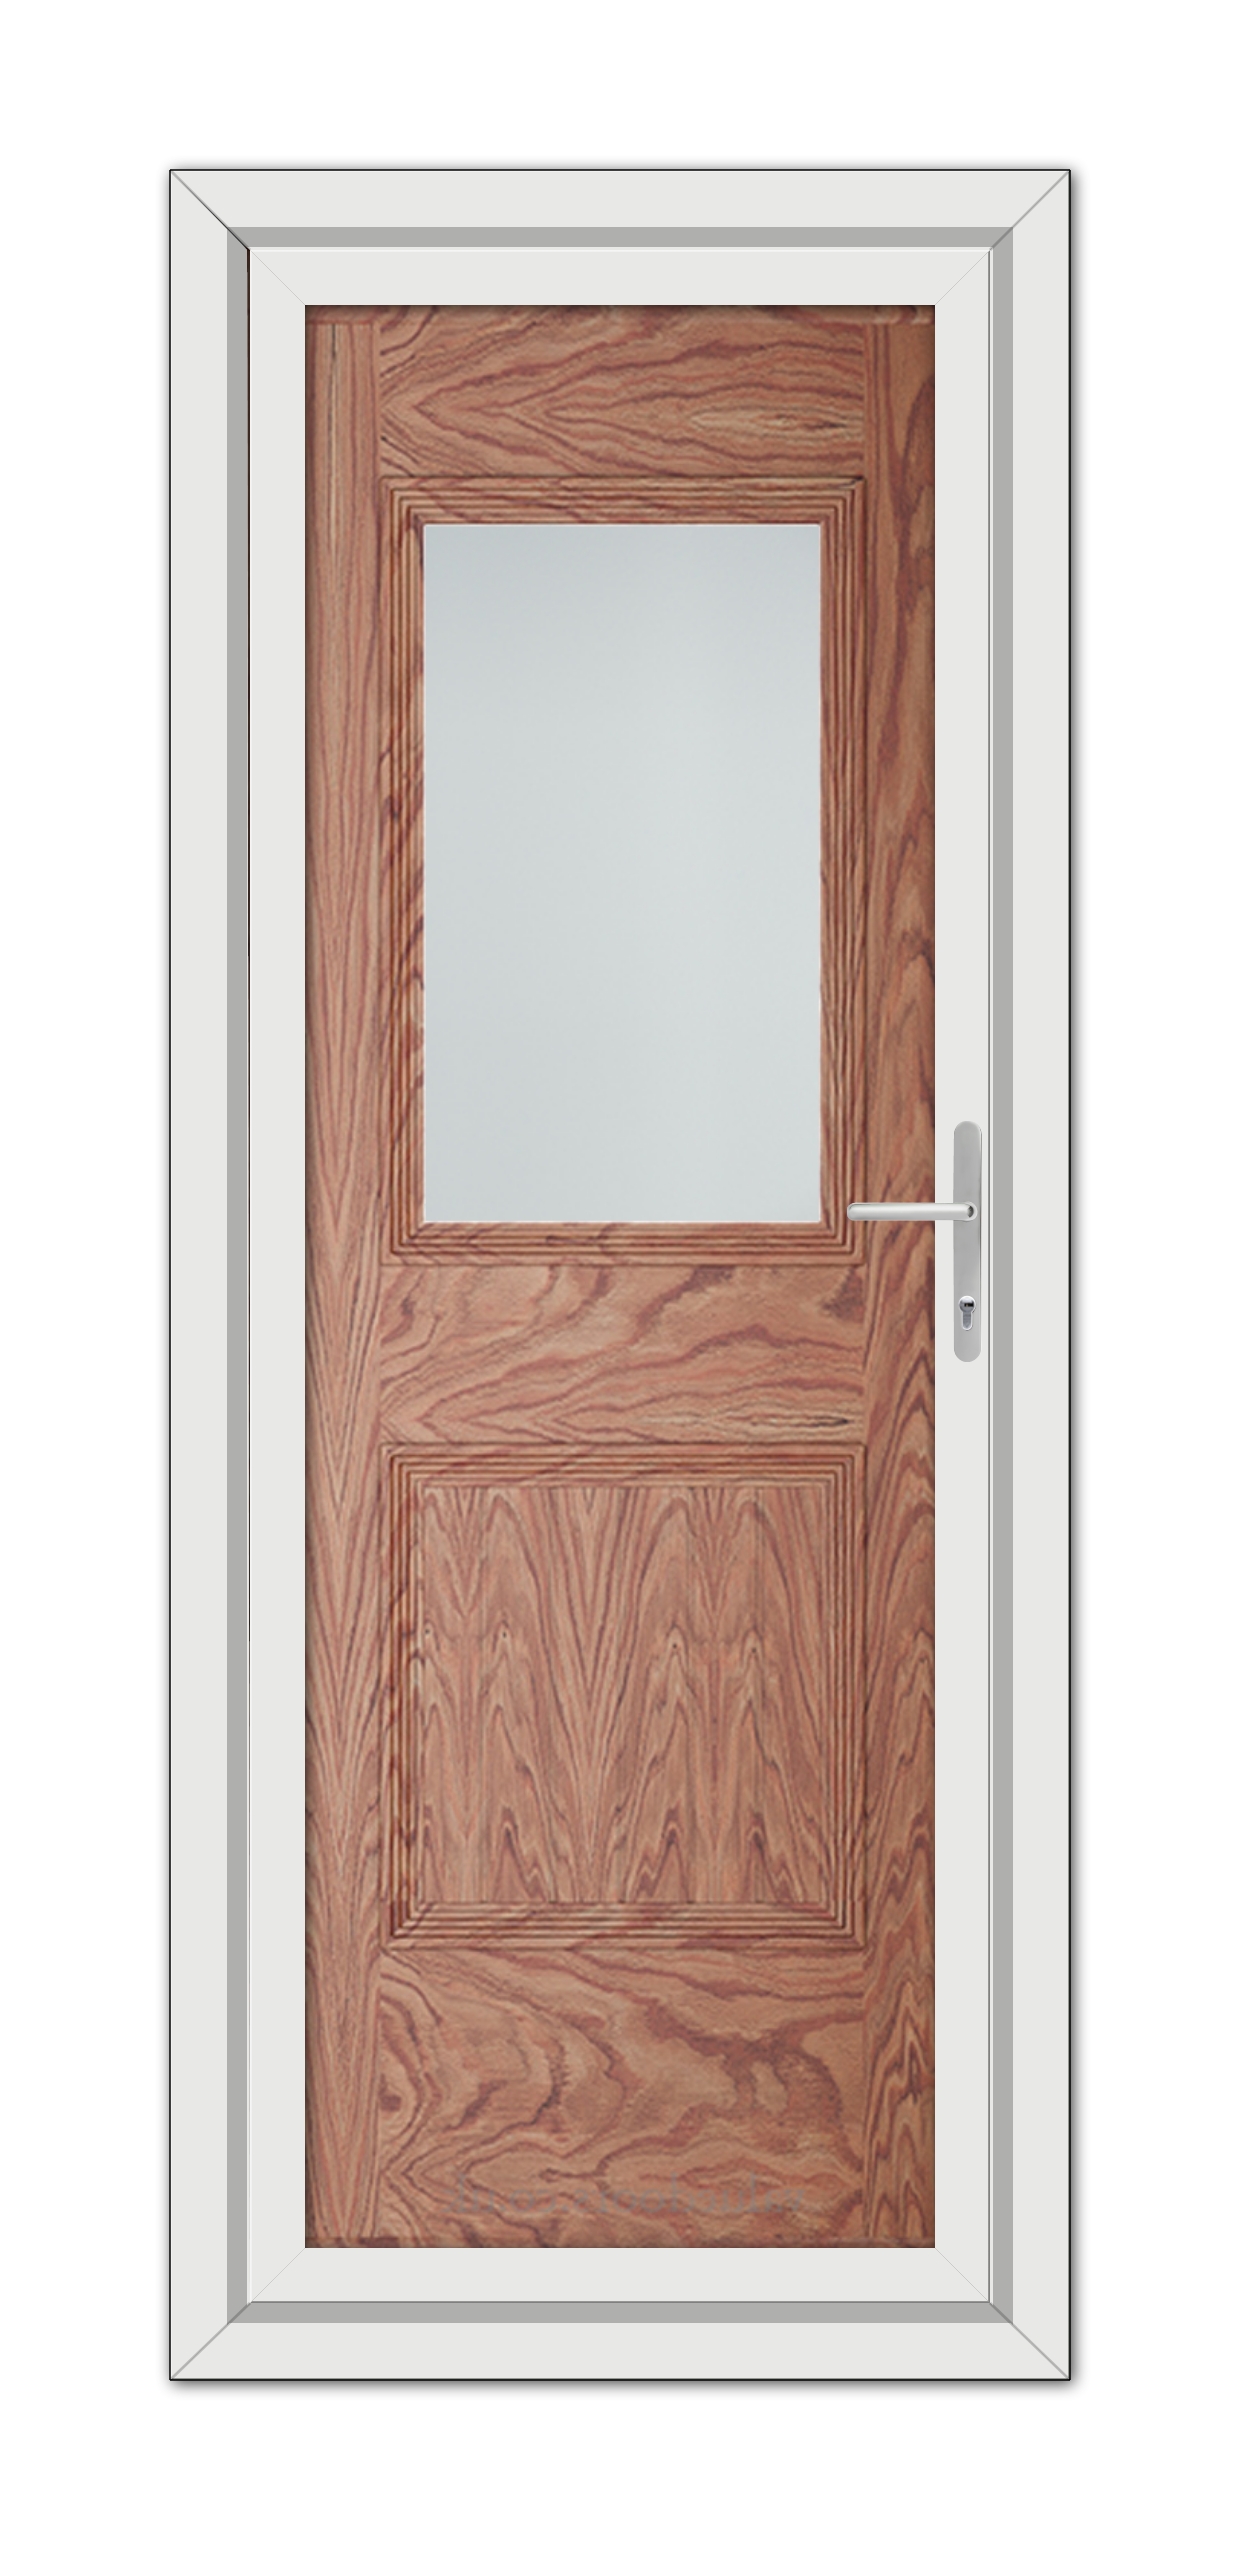 A modern Solid Oak Alnwick One uPVC door with a rectangular window and a metal handle, enclosed in a white frame.